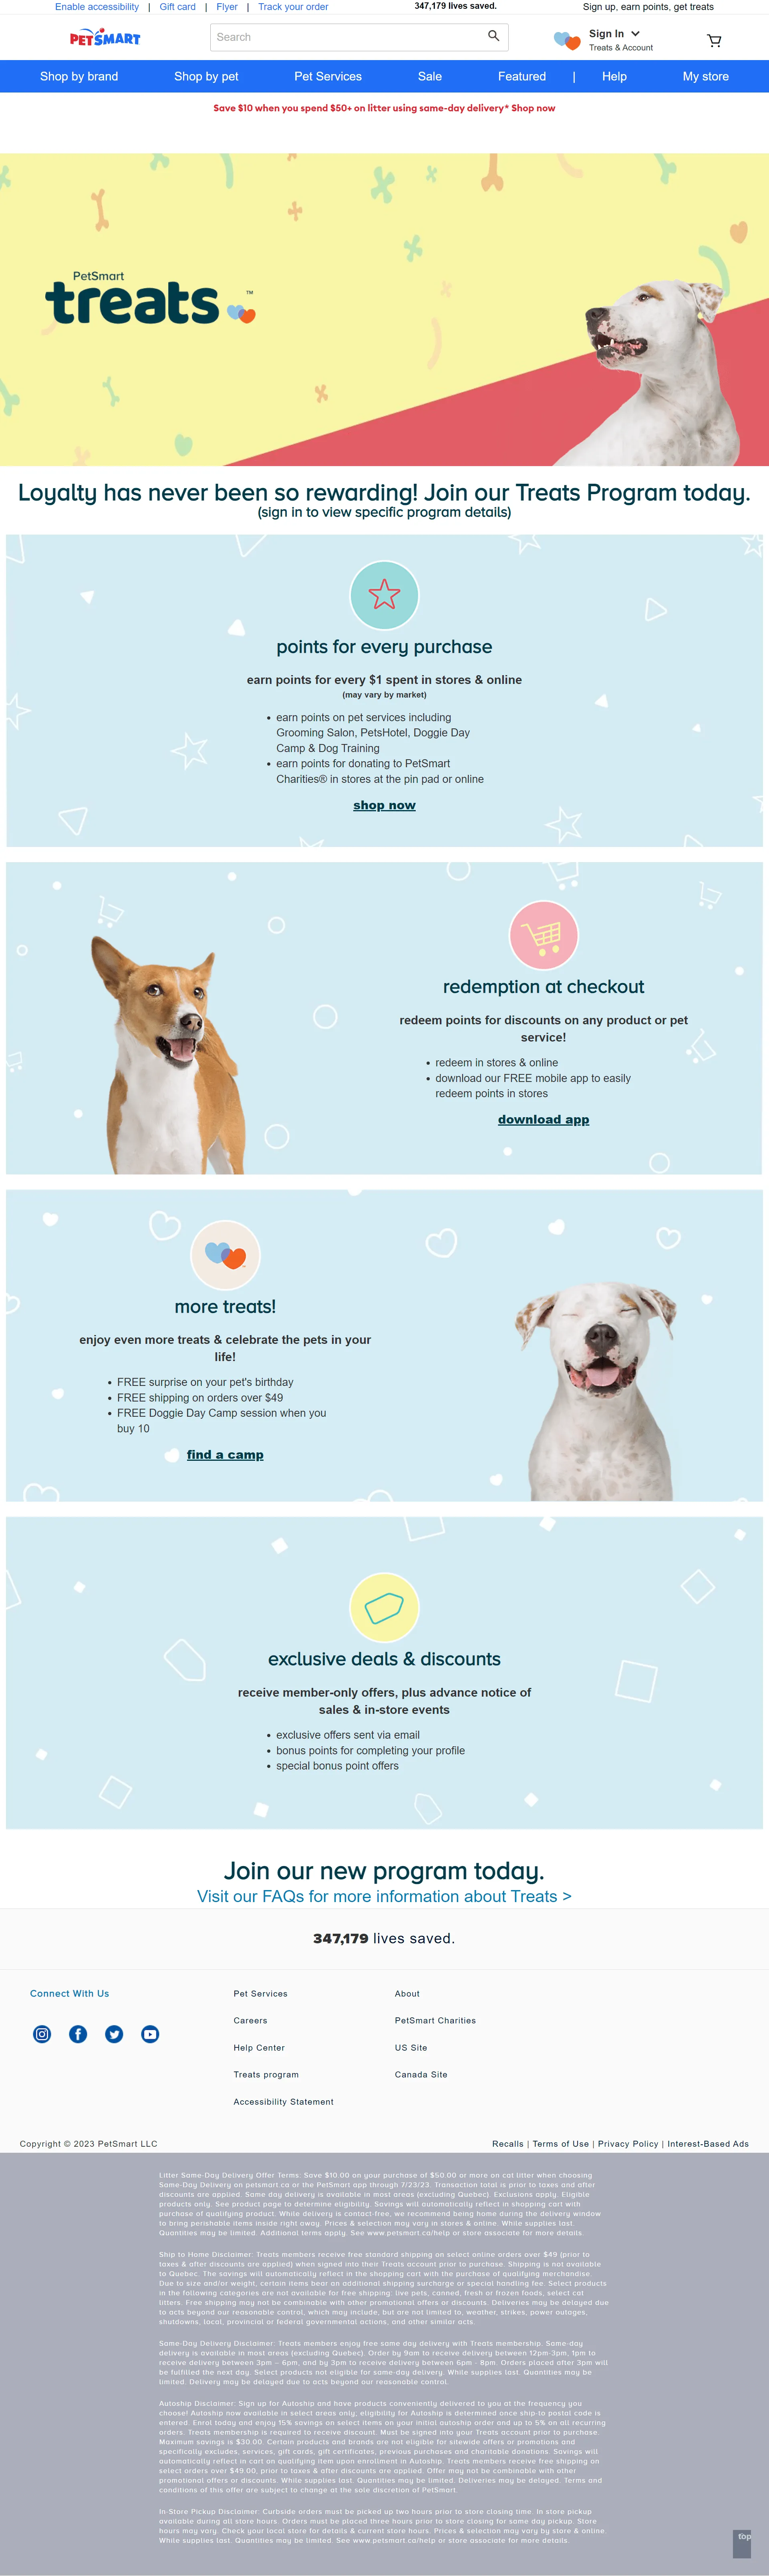 A screenshot of the interface for a loyalty program offered by Petsmart, a popular pet store.